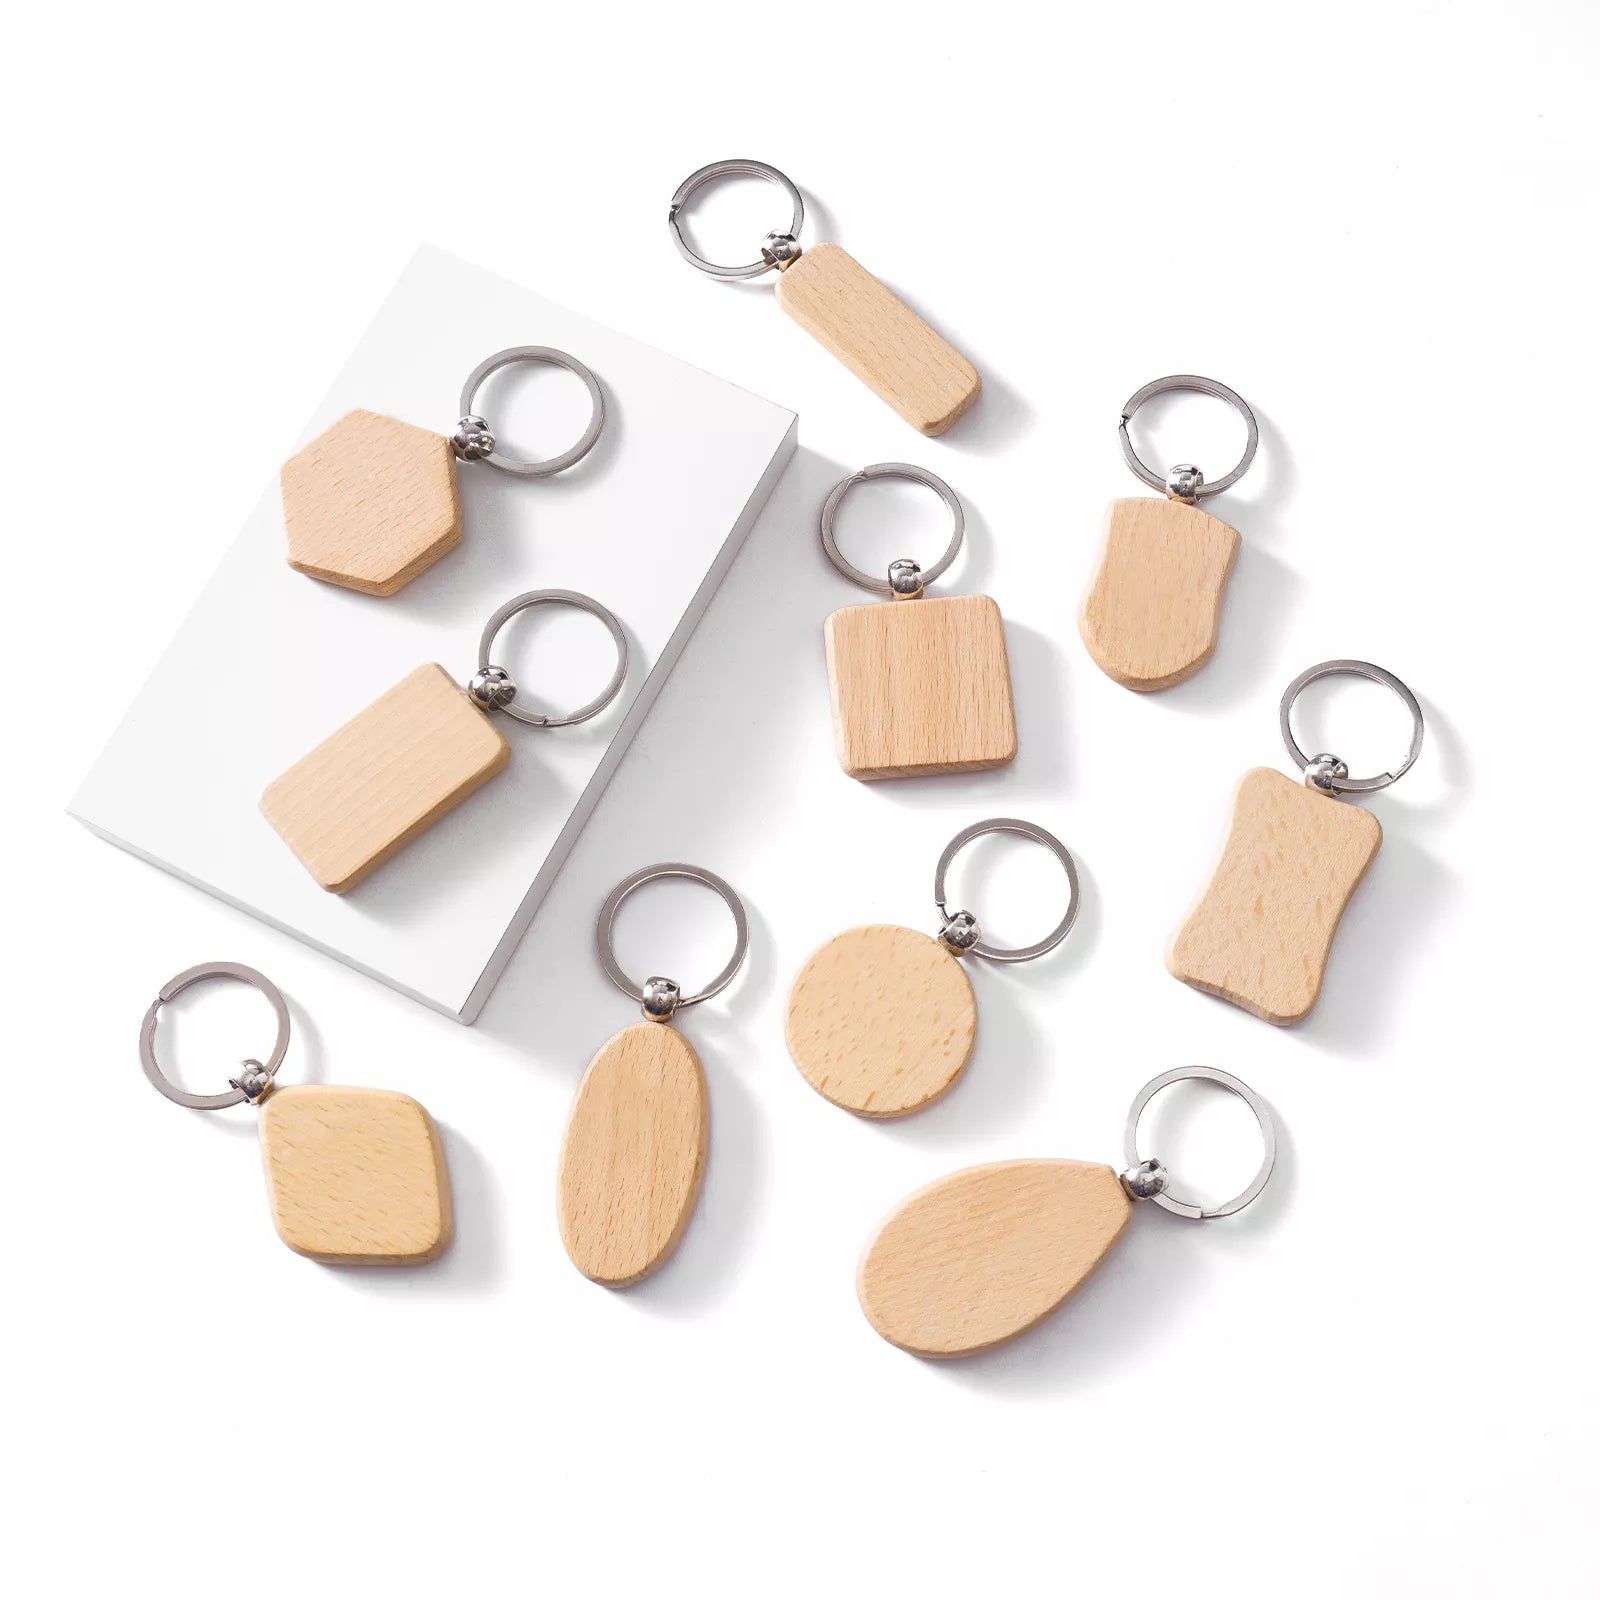 Keychain Triangles Key Ring Key Chain Parts - Set of 100 - Key Chain A –  Happy Wood Products